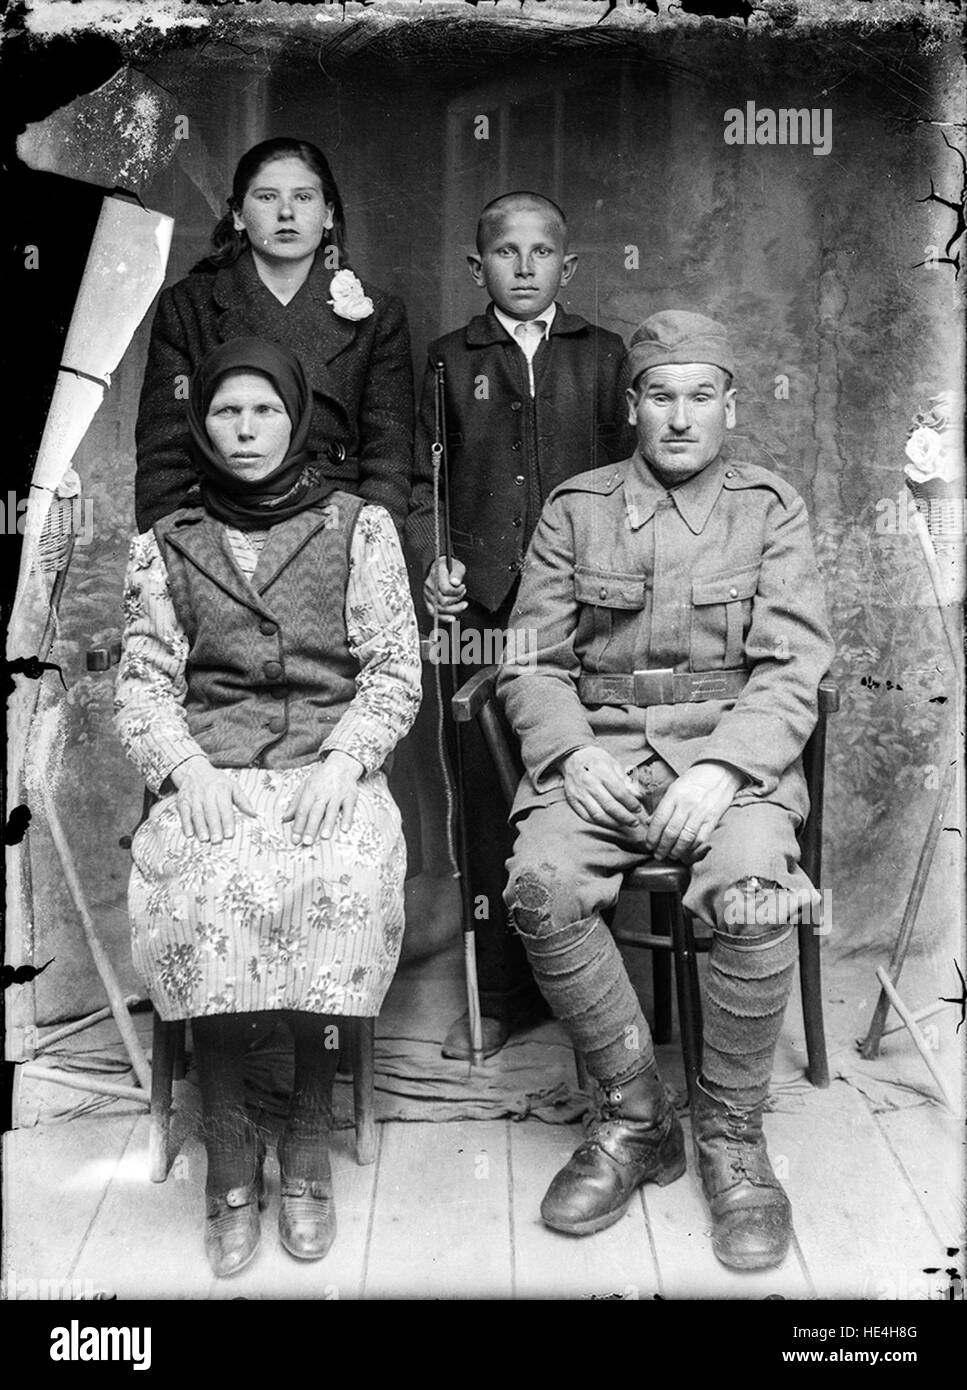 Family portrait, the man in the right is wearing an army uniform (soldier ro.wikipedia.org/wiki/Grad militar ( http://ro.wikipedia.org/wiki/Grad militar ) ), the boy in the middle is proudly holding a new whip - probably arrived at the photo studio by a horse wagon. Stock Photo